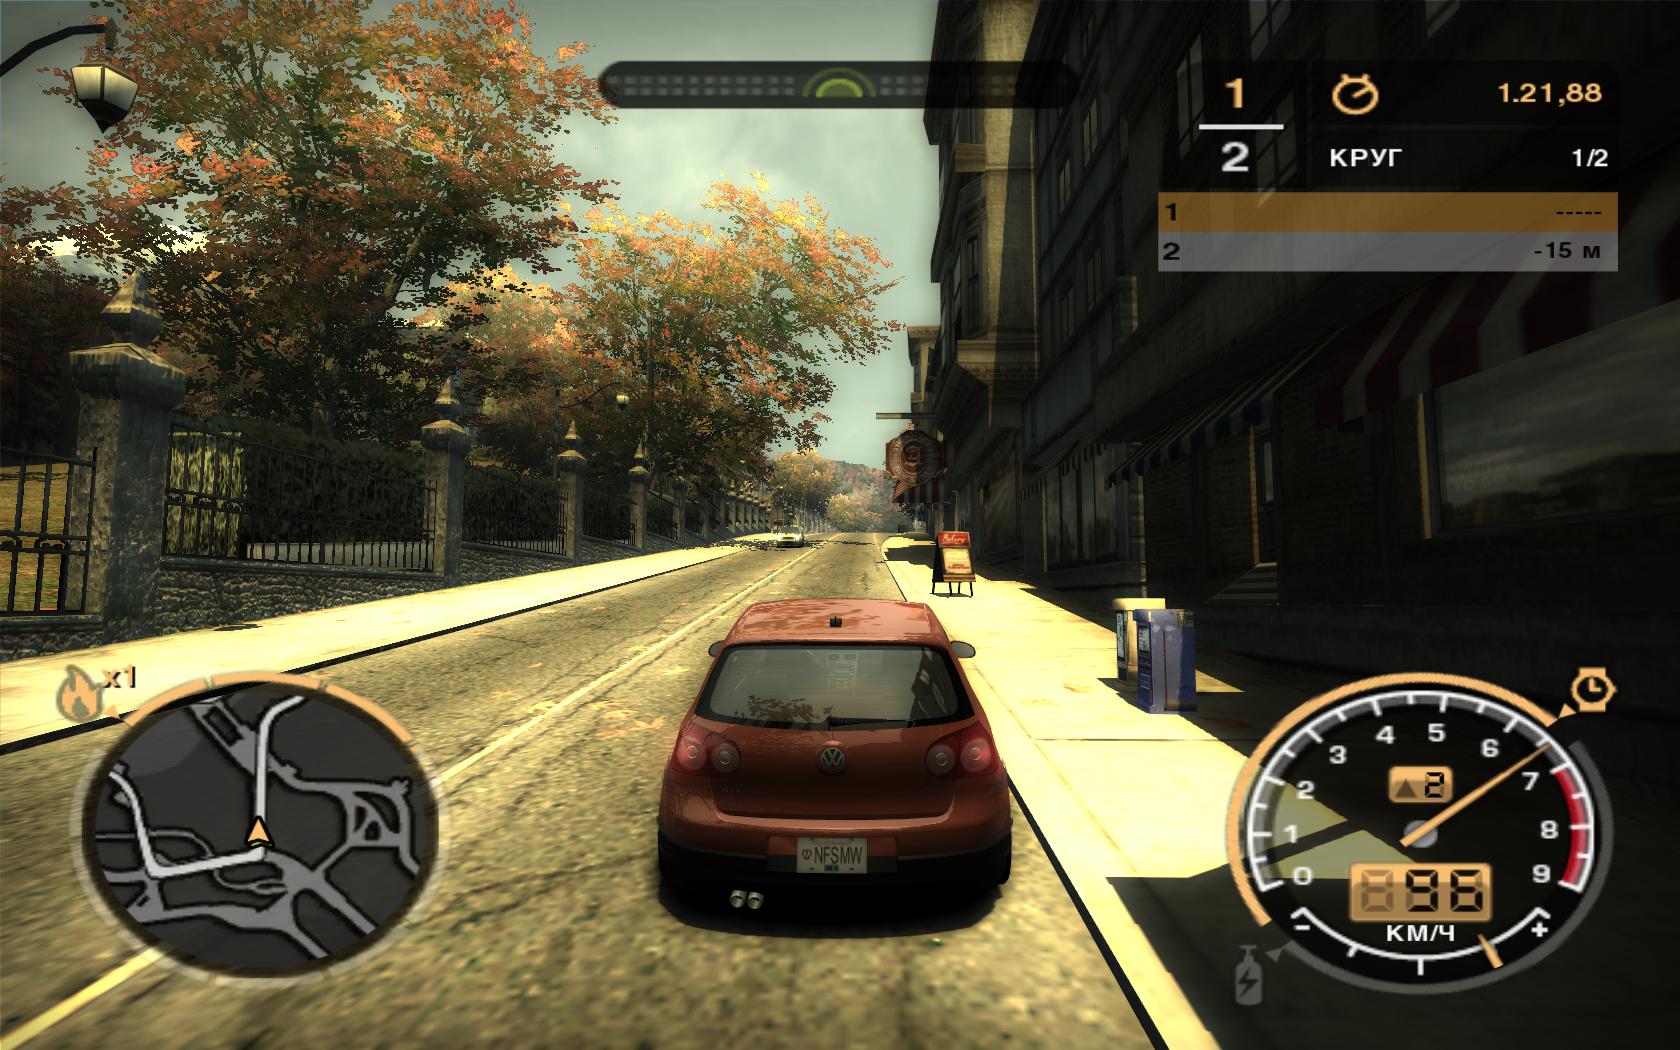 Nfs most wanted mobile 2005. NFS most wanted 2005. Новый NFS most wanted 2005. Нфс most wanted 2005 на телефон. Need for Speed 2005 на андроид.